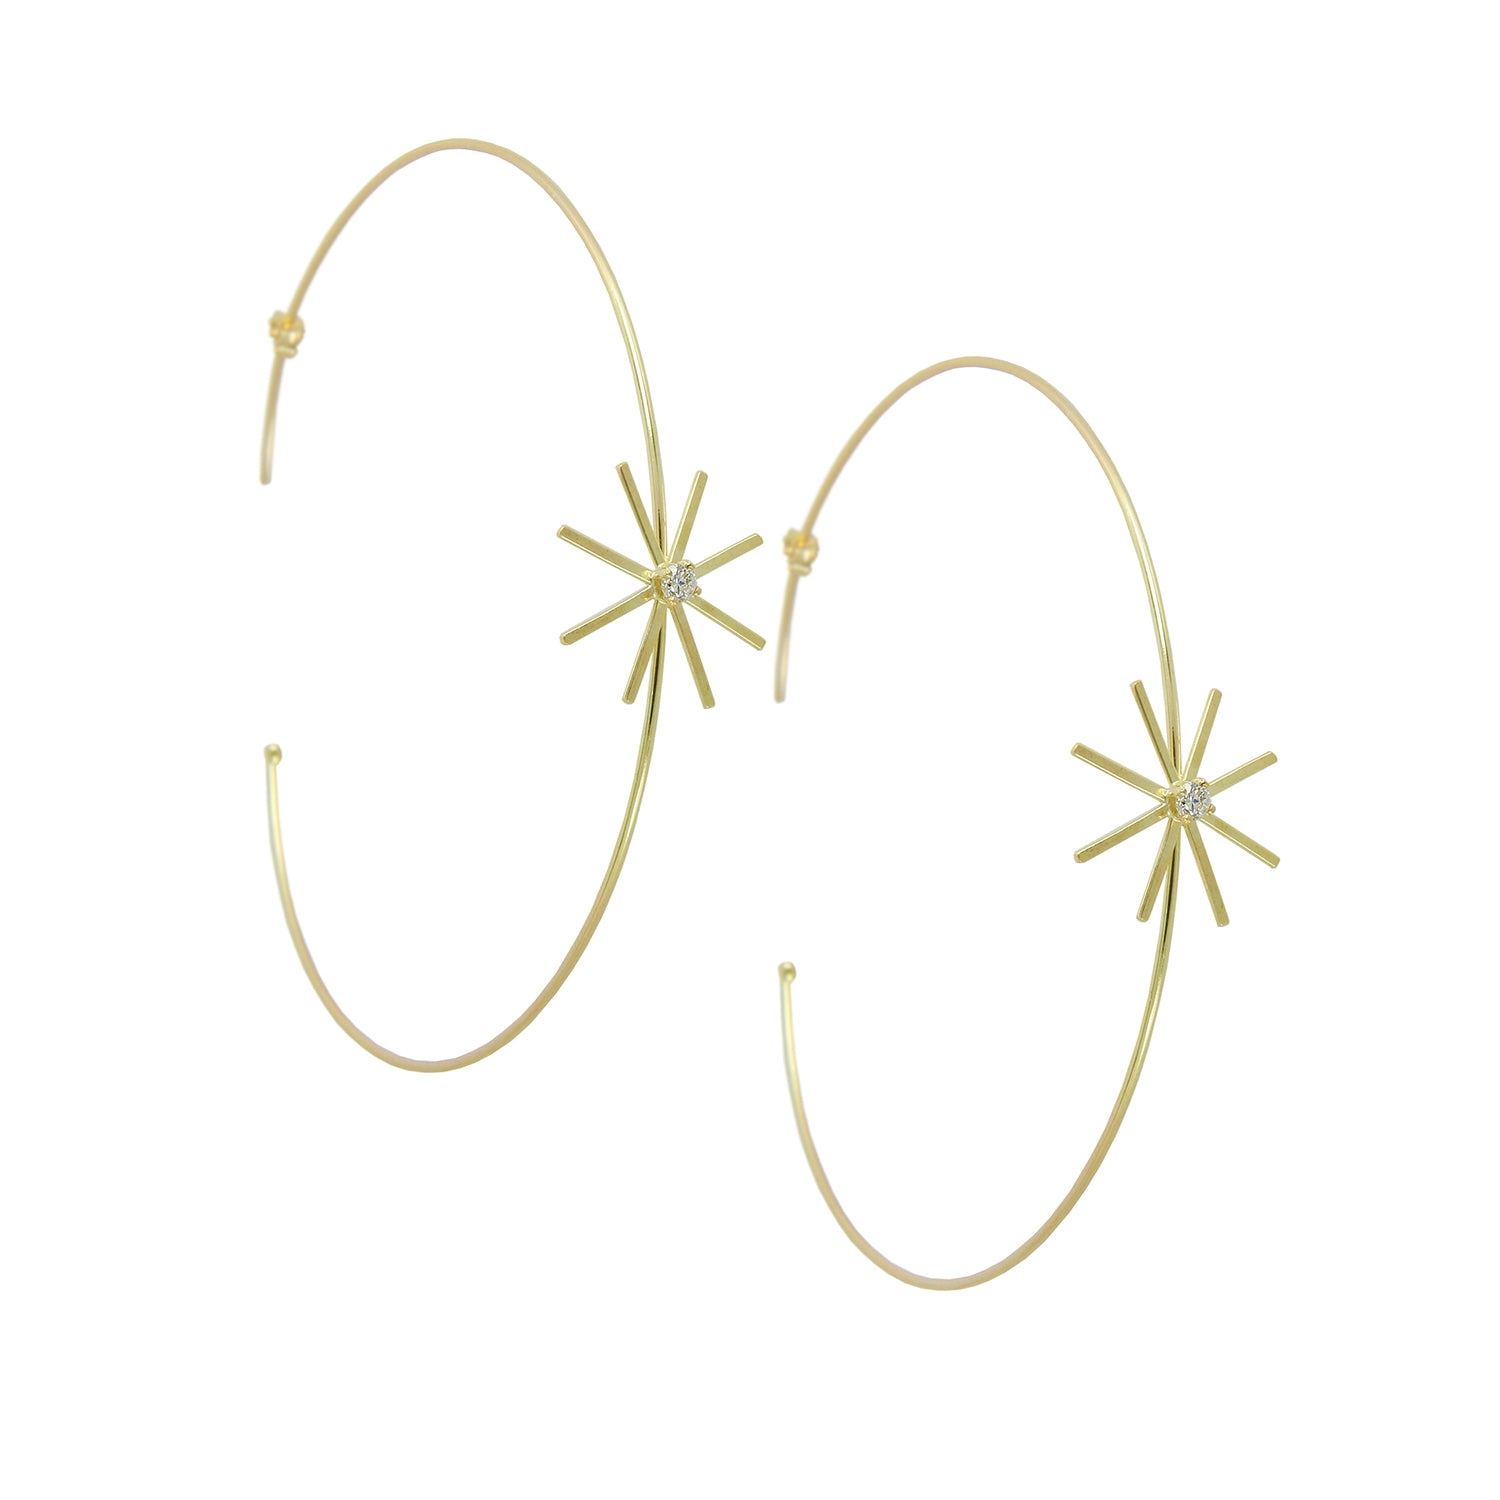 These 18ct yellow gold fine large diamond hoop earrings are from our Pop Up Daisy Collection. The Flower motif is made up from fine gold petals and features a central Diamond set collet.